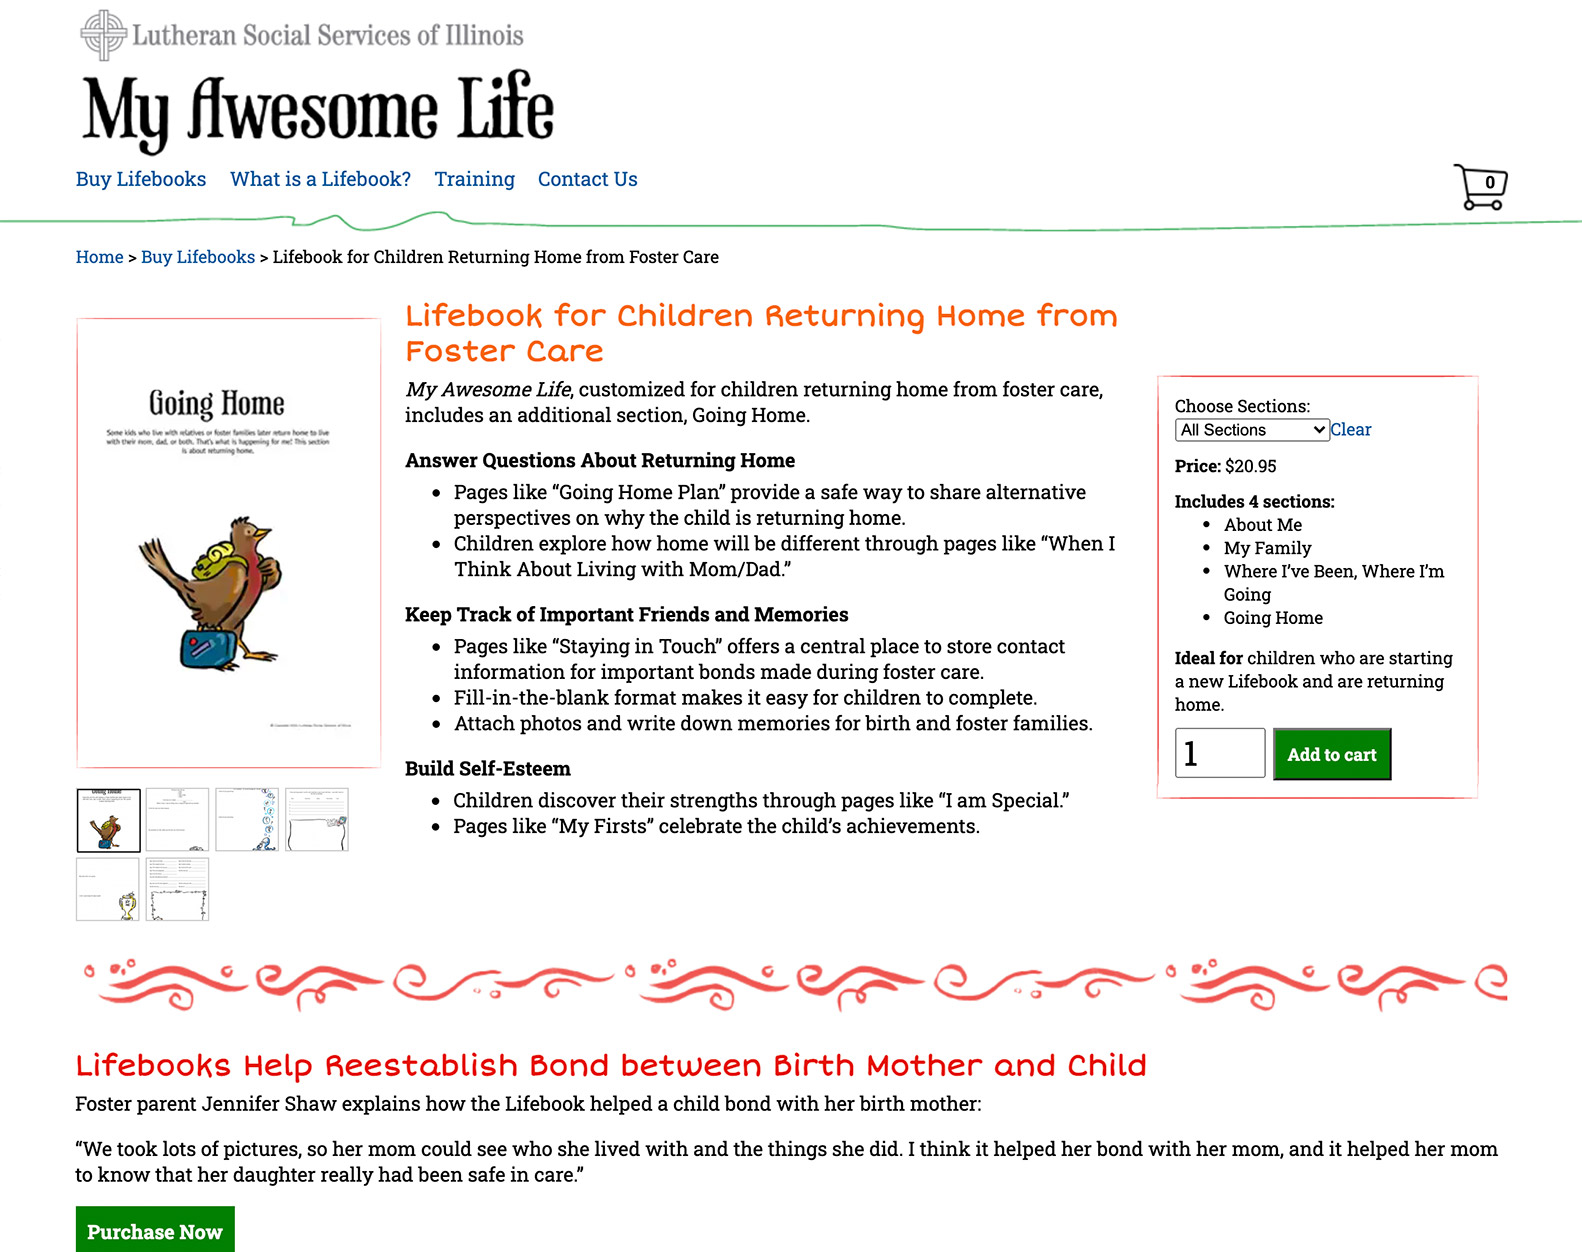 Click here to view a screenshot of My Awesome Life: Lifebook Product Page - Desktop